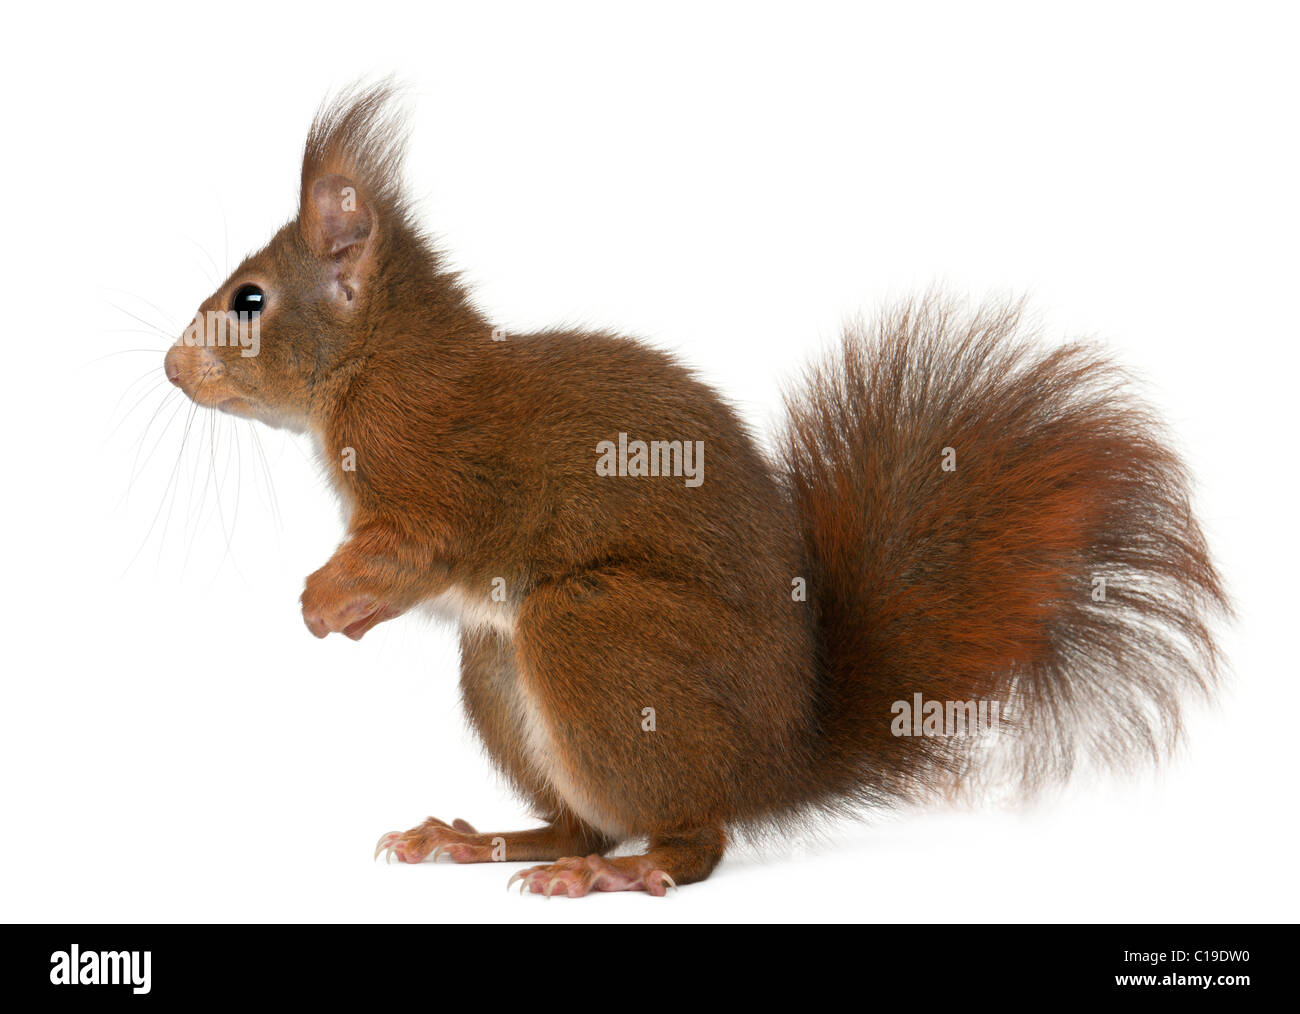 Eurasian red squirrel, Sciurus vulgaris, 4 years old, in front of white background Stock Photo